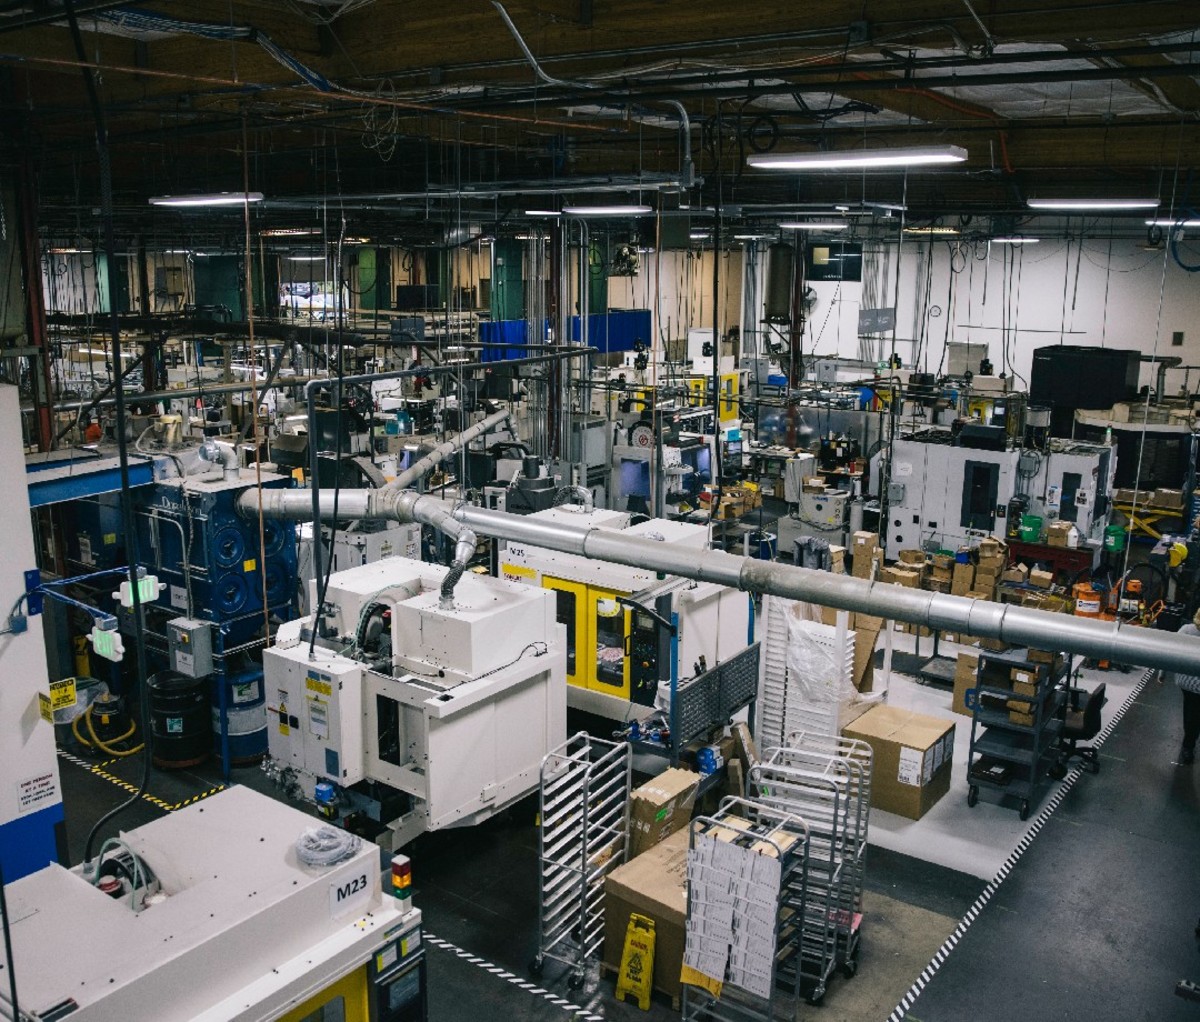 Interior wide shot of the Benchmade factory with rows of machines